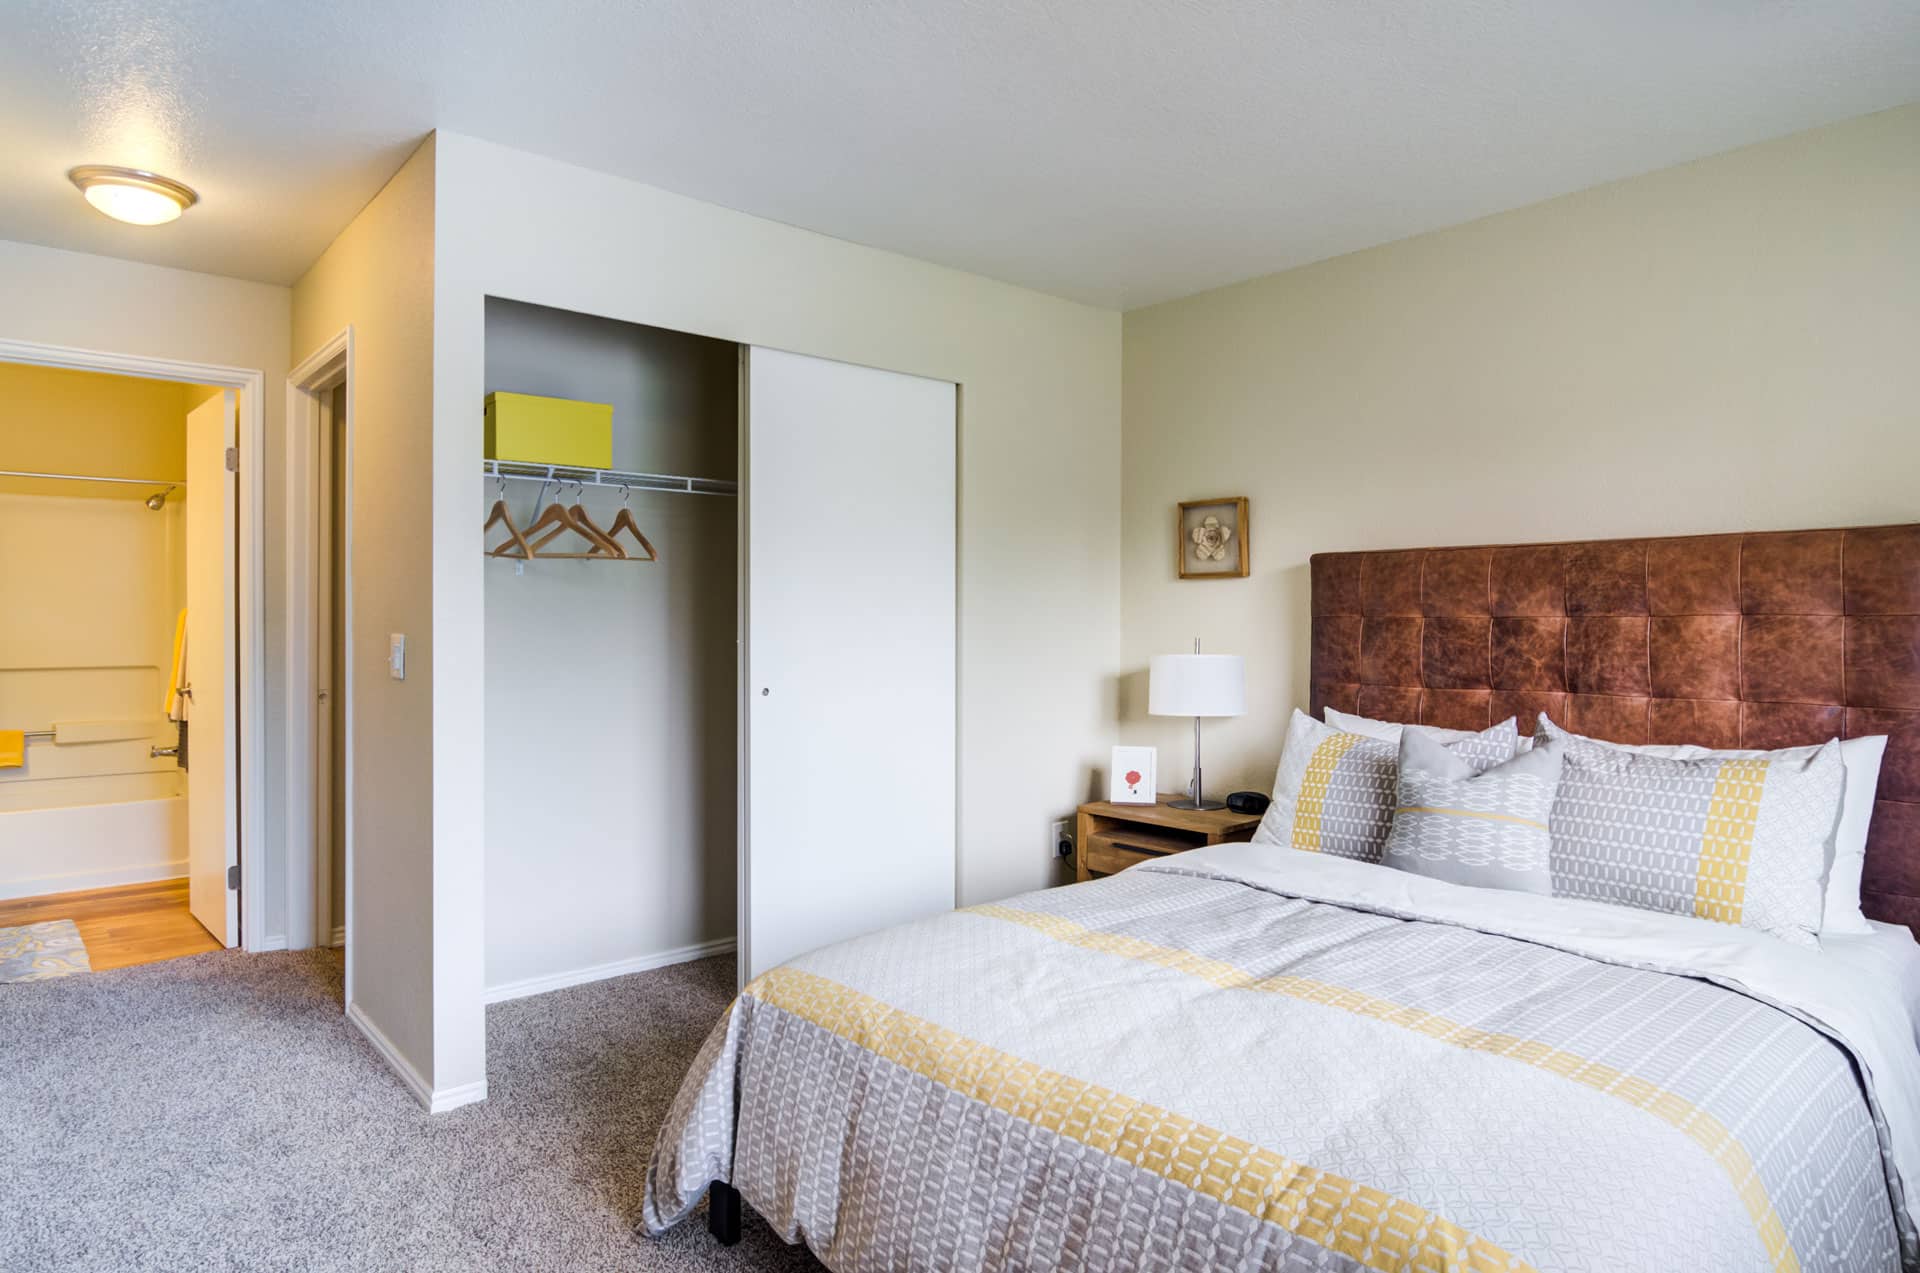 Spacious bedrooms with large closets.